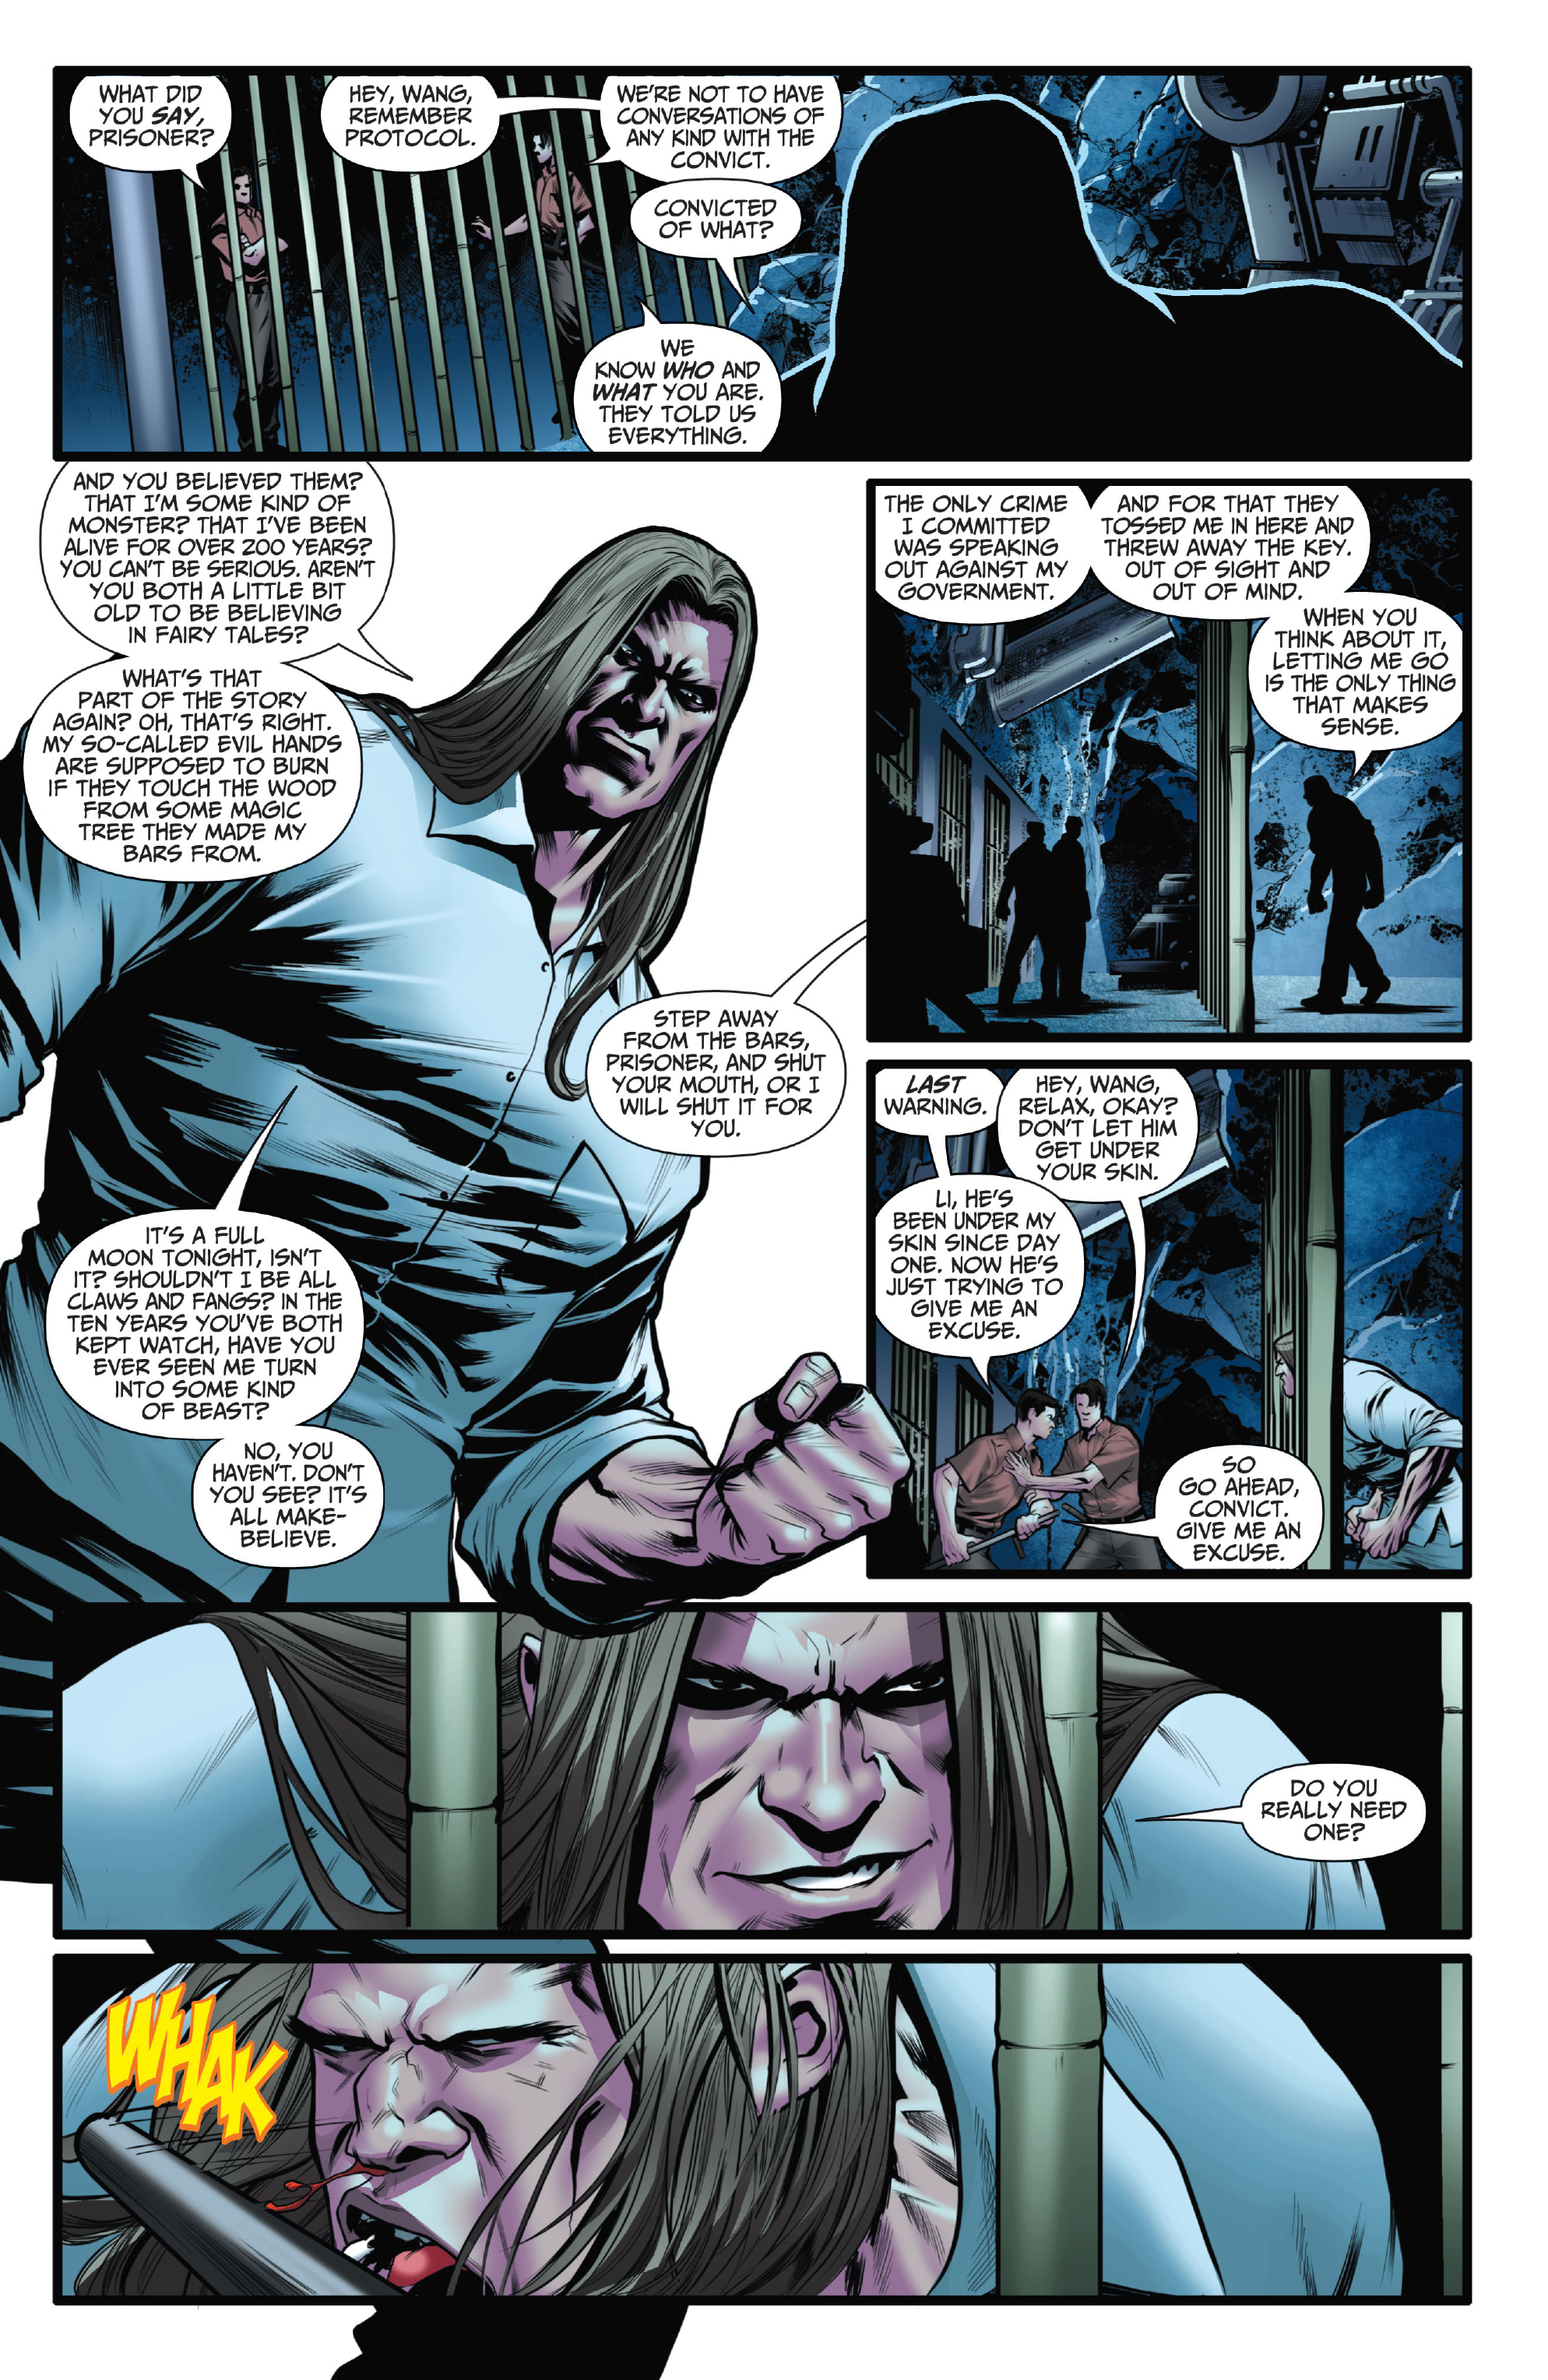 Van Helsing vs The League of Monsters (2020-): Chapter 1 - Page 4